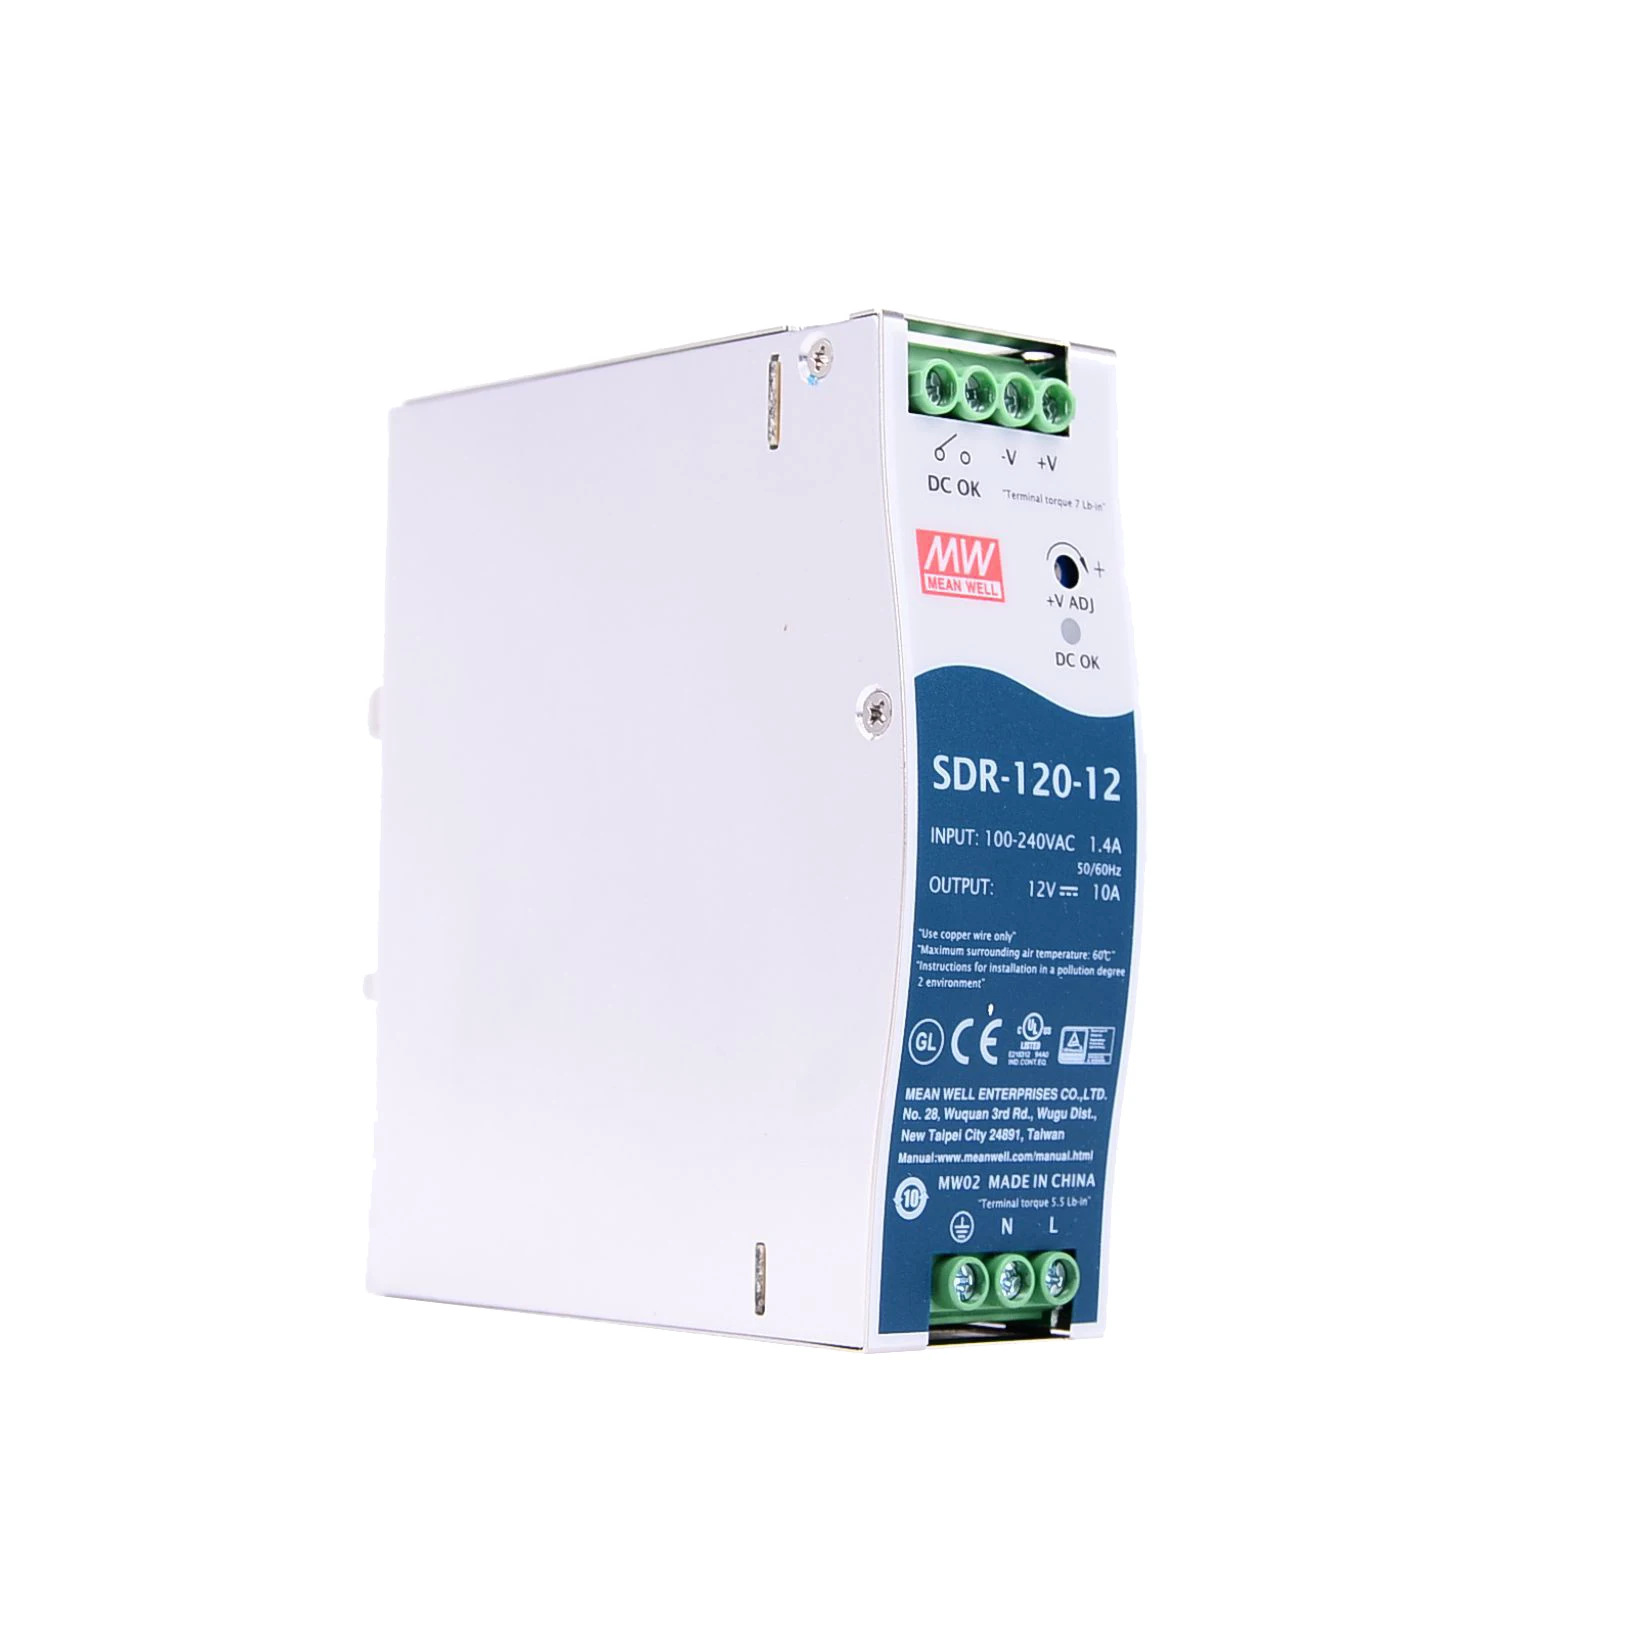 

Original Mean Well SDR-120-12 meanwell DC 12V 10A 120W Single Output Industrial DIN Rail With PFC Function Power Supply